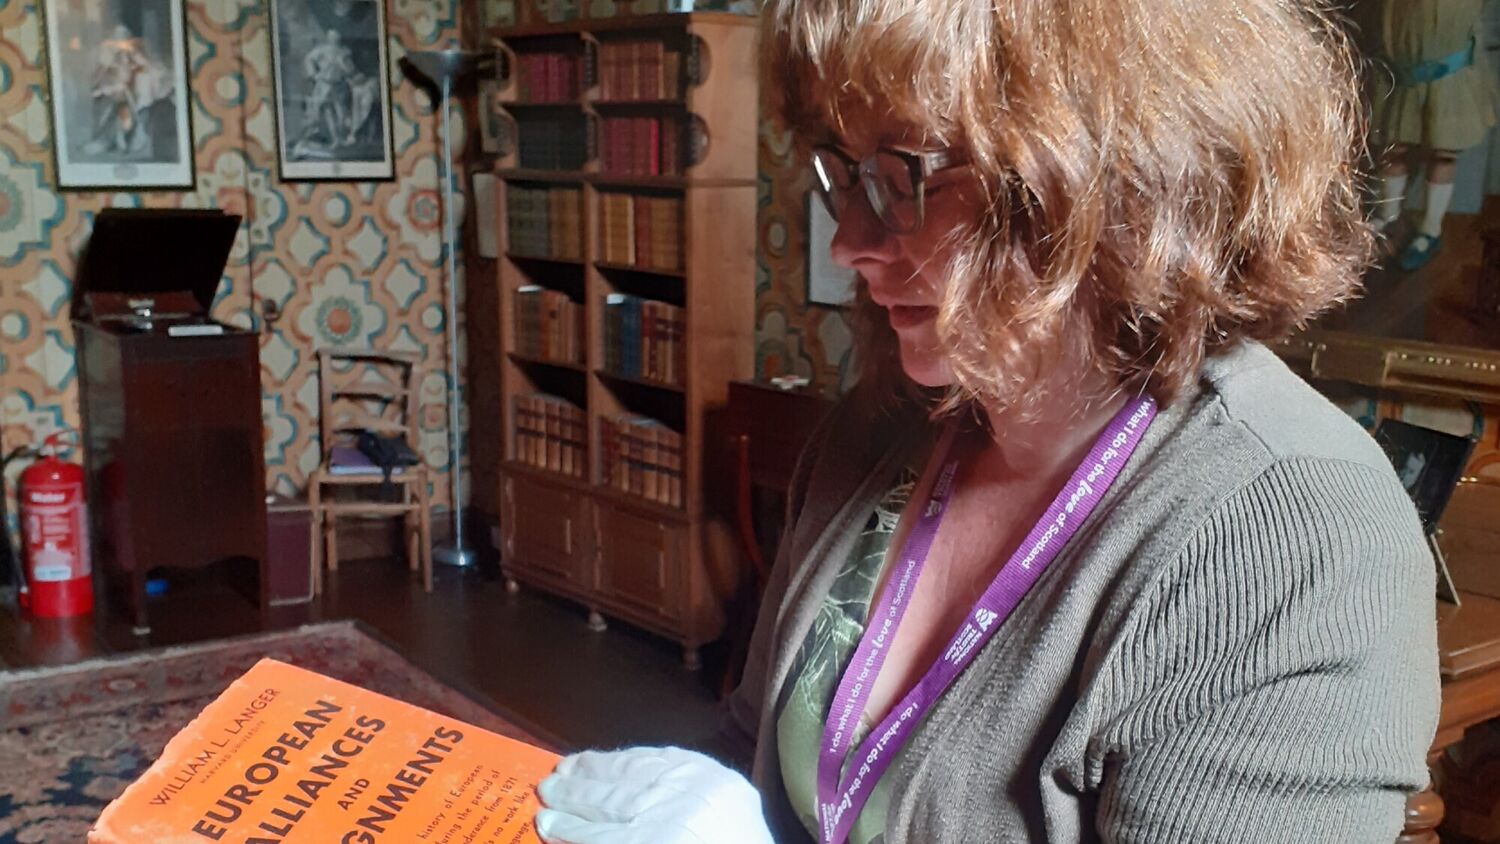 A close-up of a woman with white conservation gloves holding a hardback book with an orange cover.